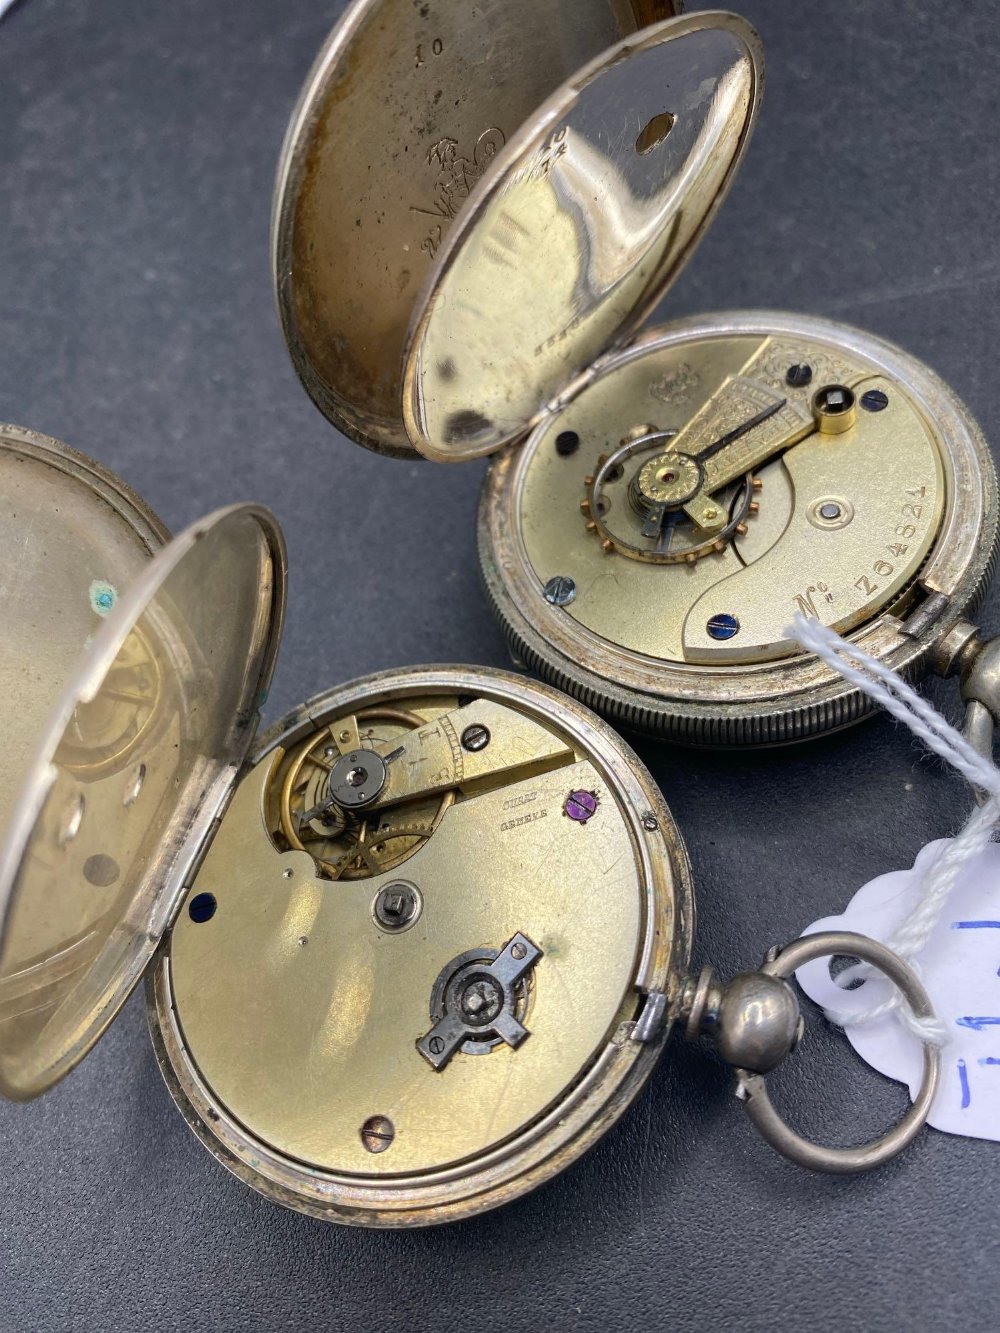 Two Victorian open faced pocket watches with decorated dials - Image 3 of 3